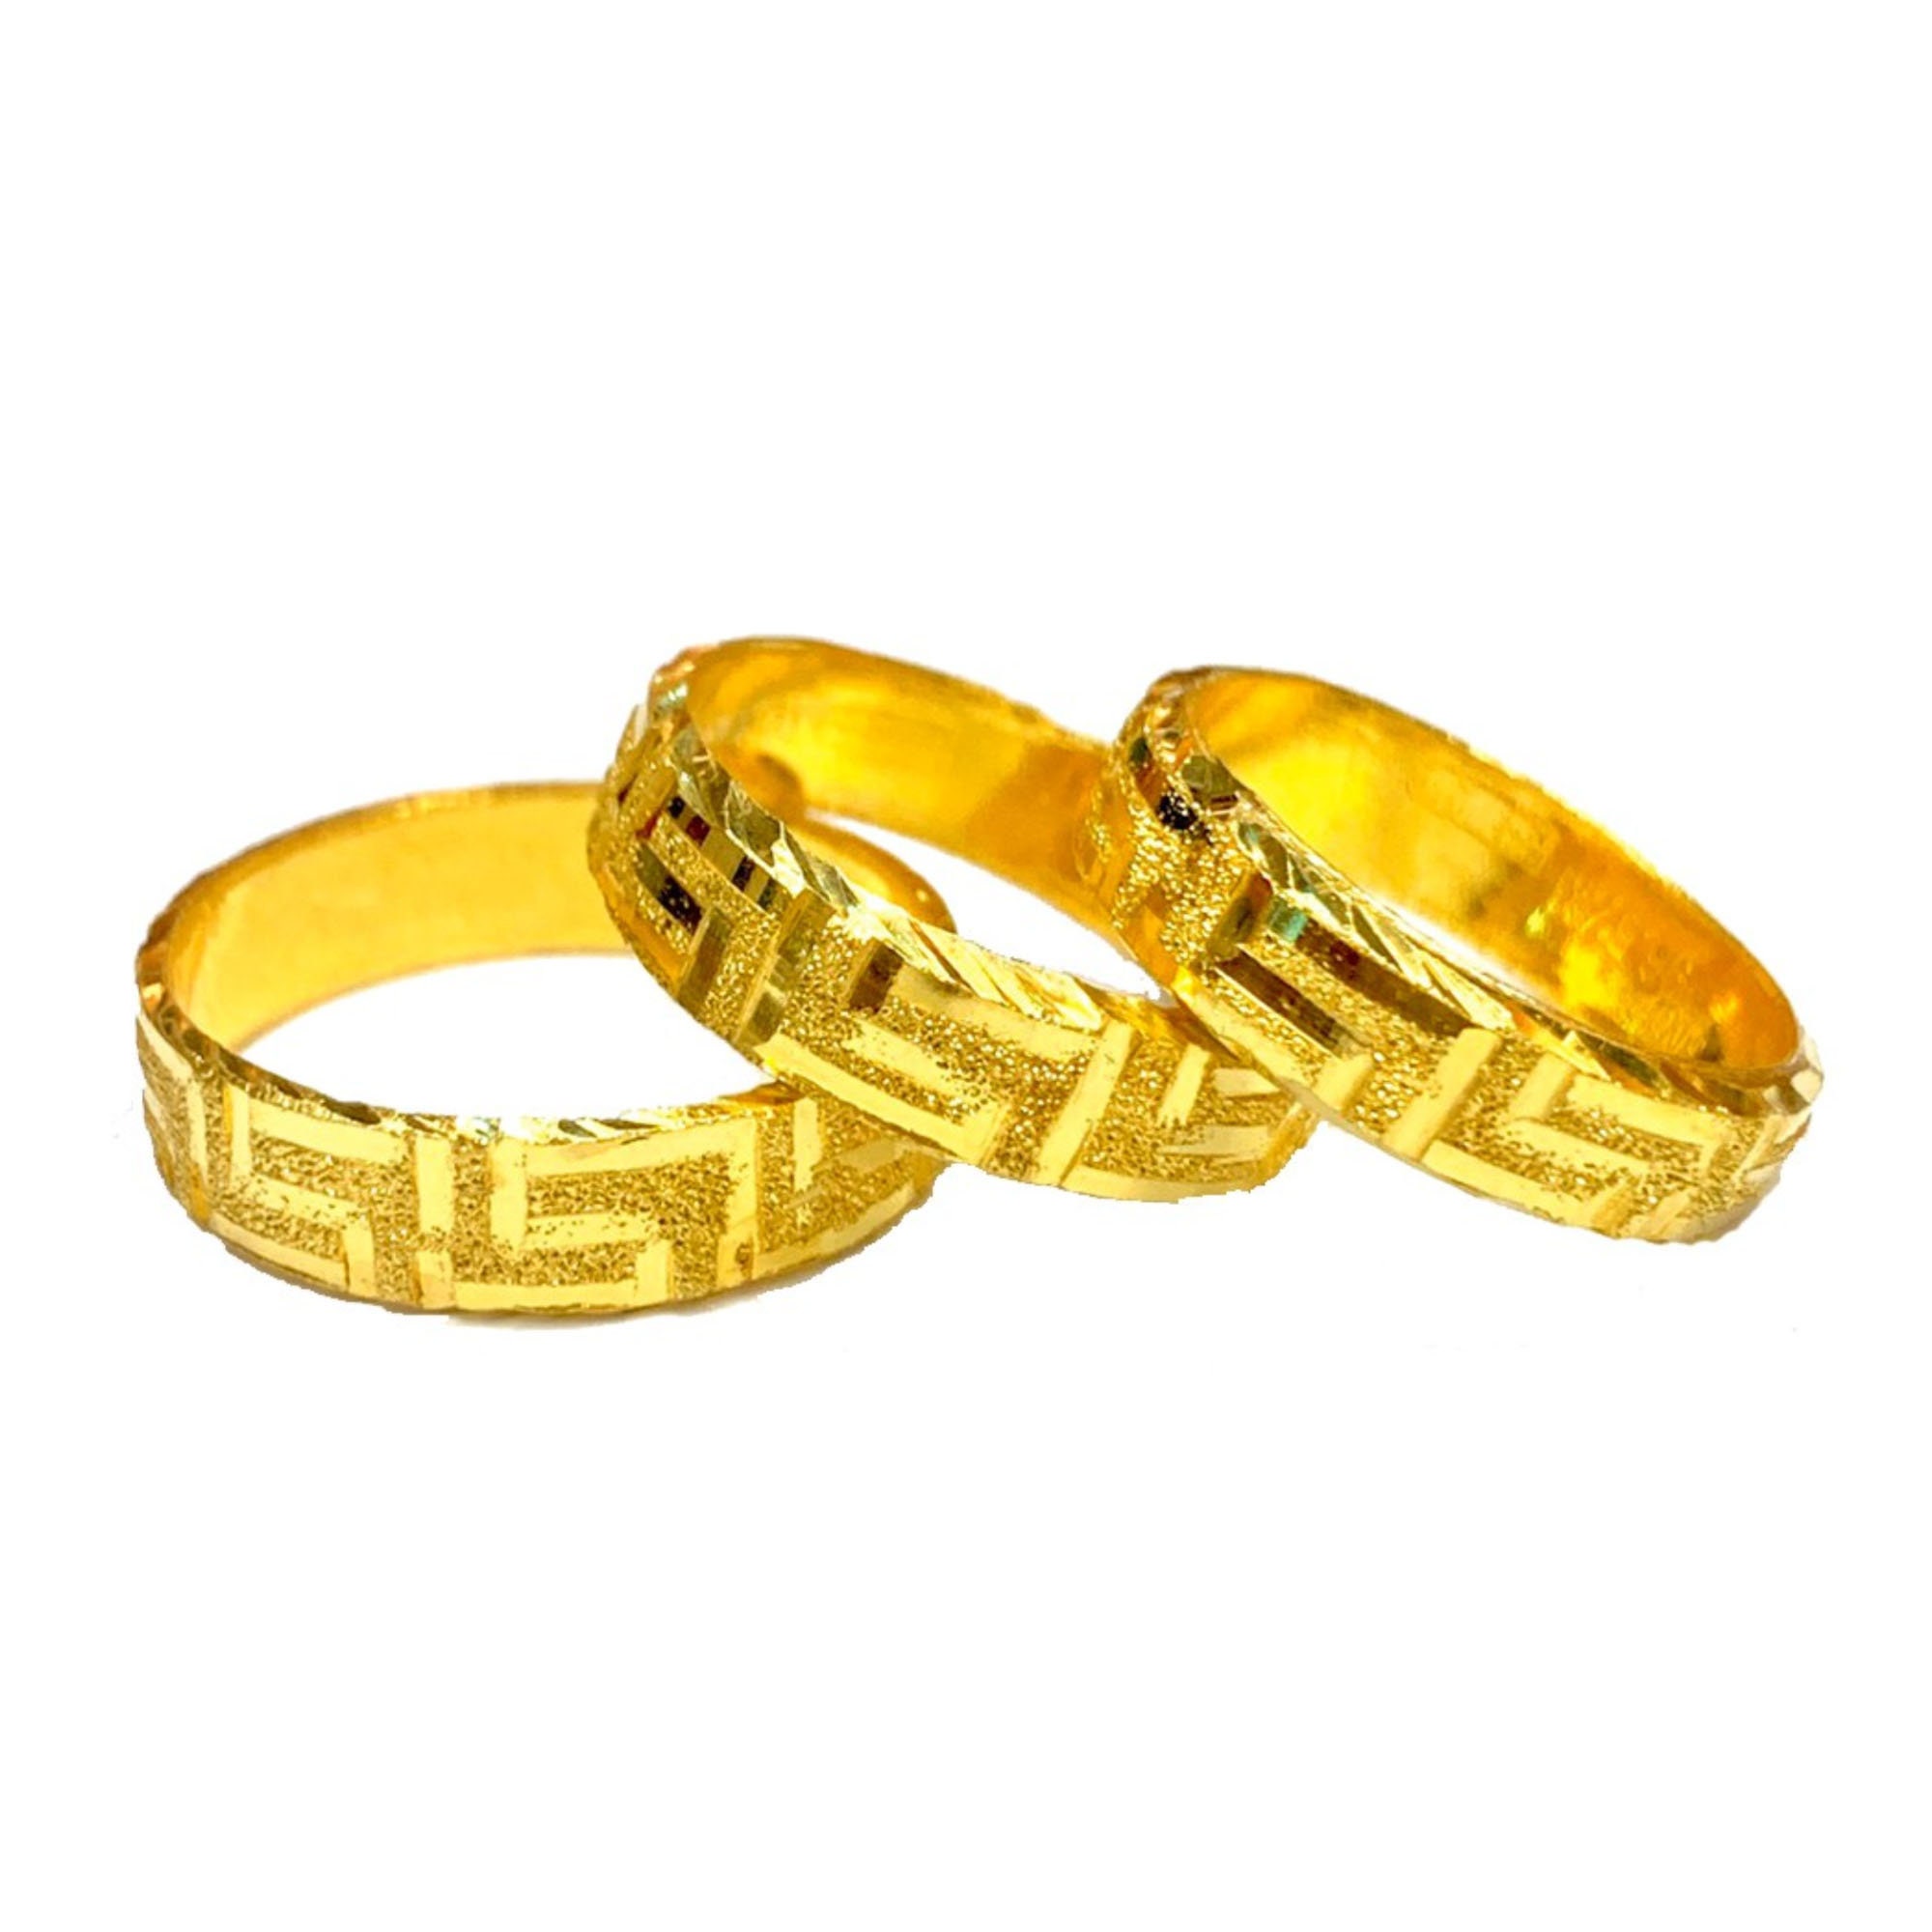 Buy 24k Gold Ring Online In India - Etsy India